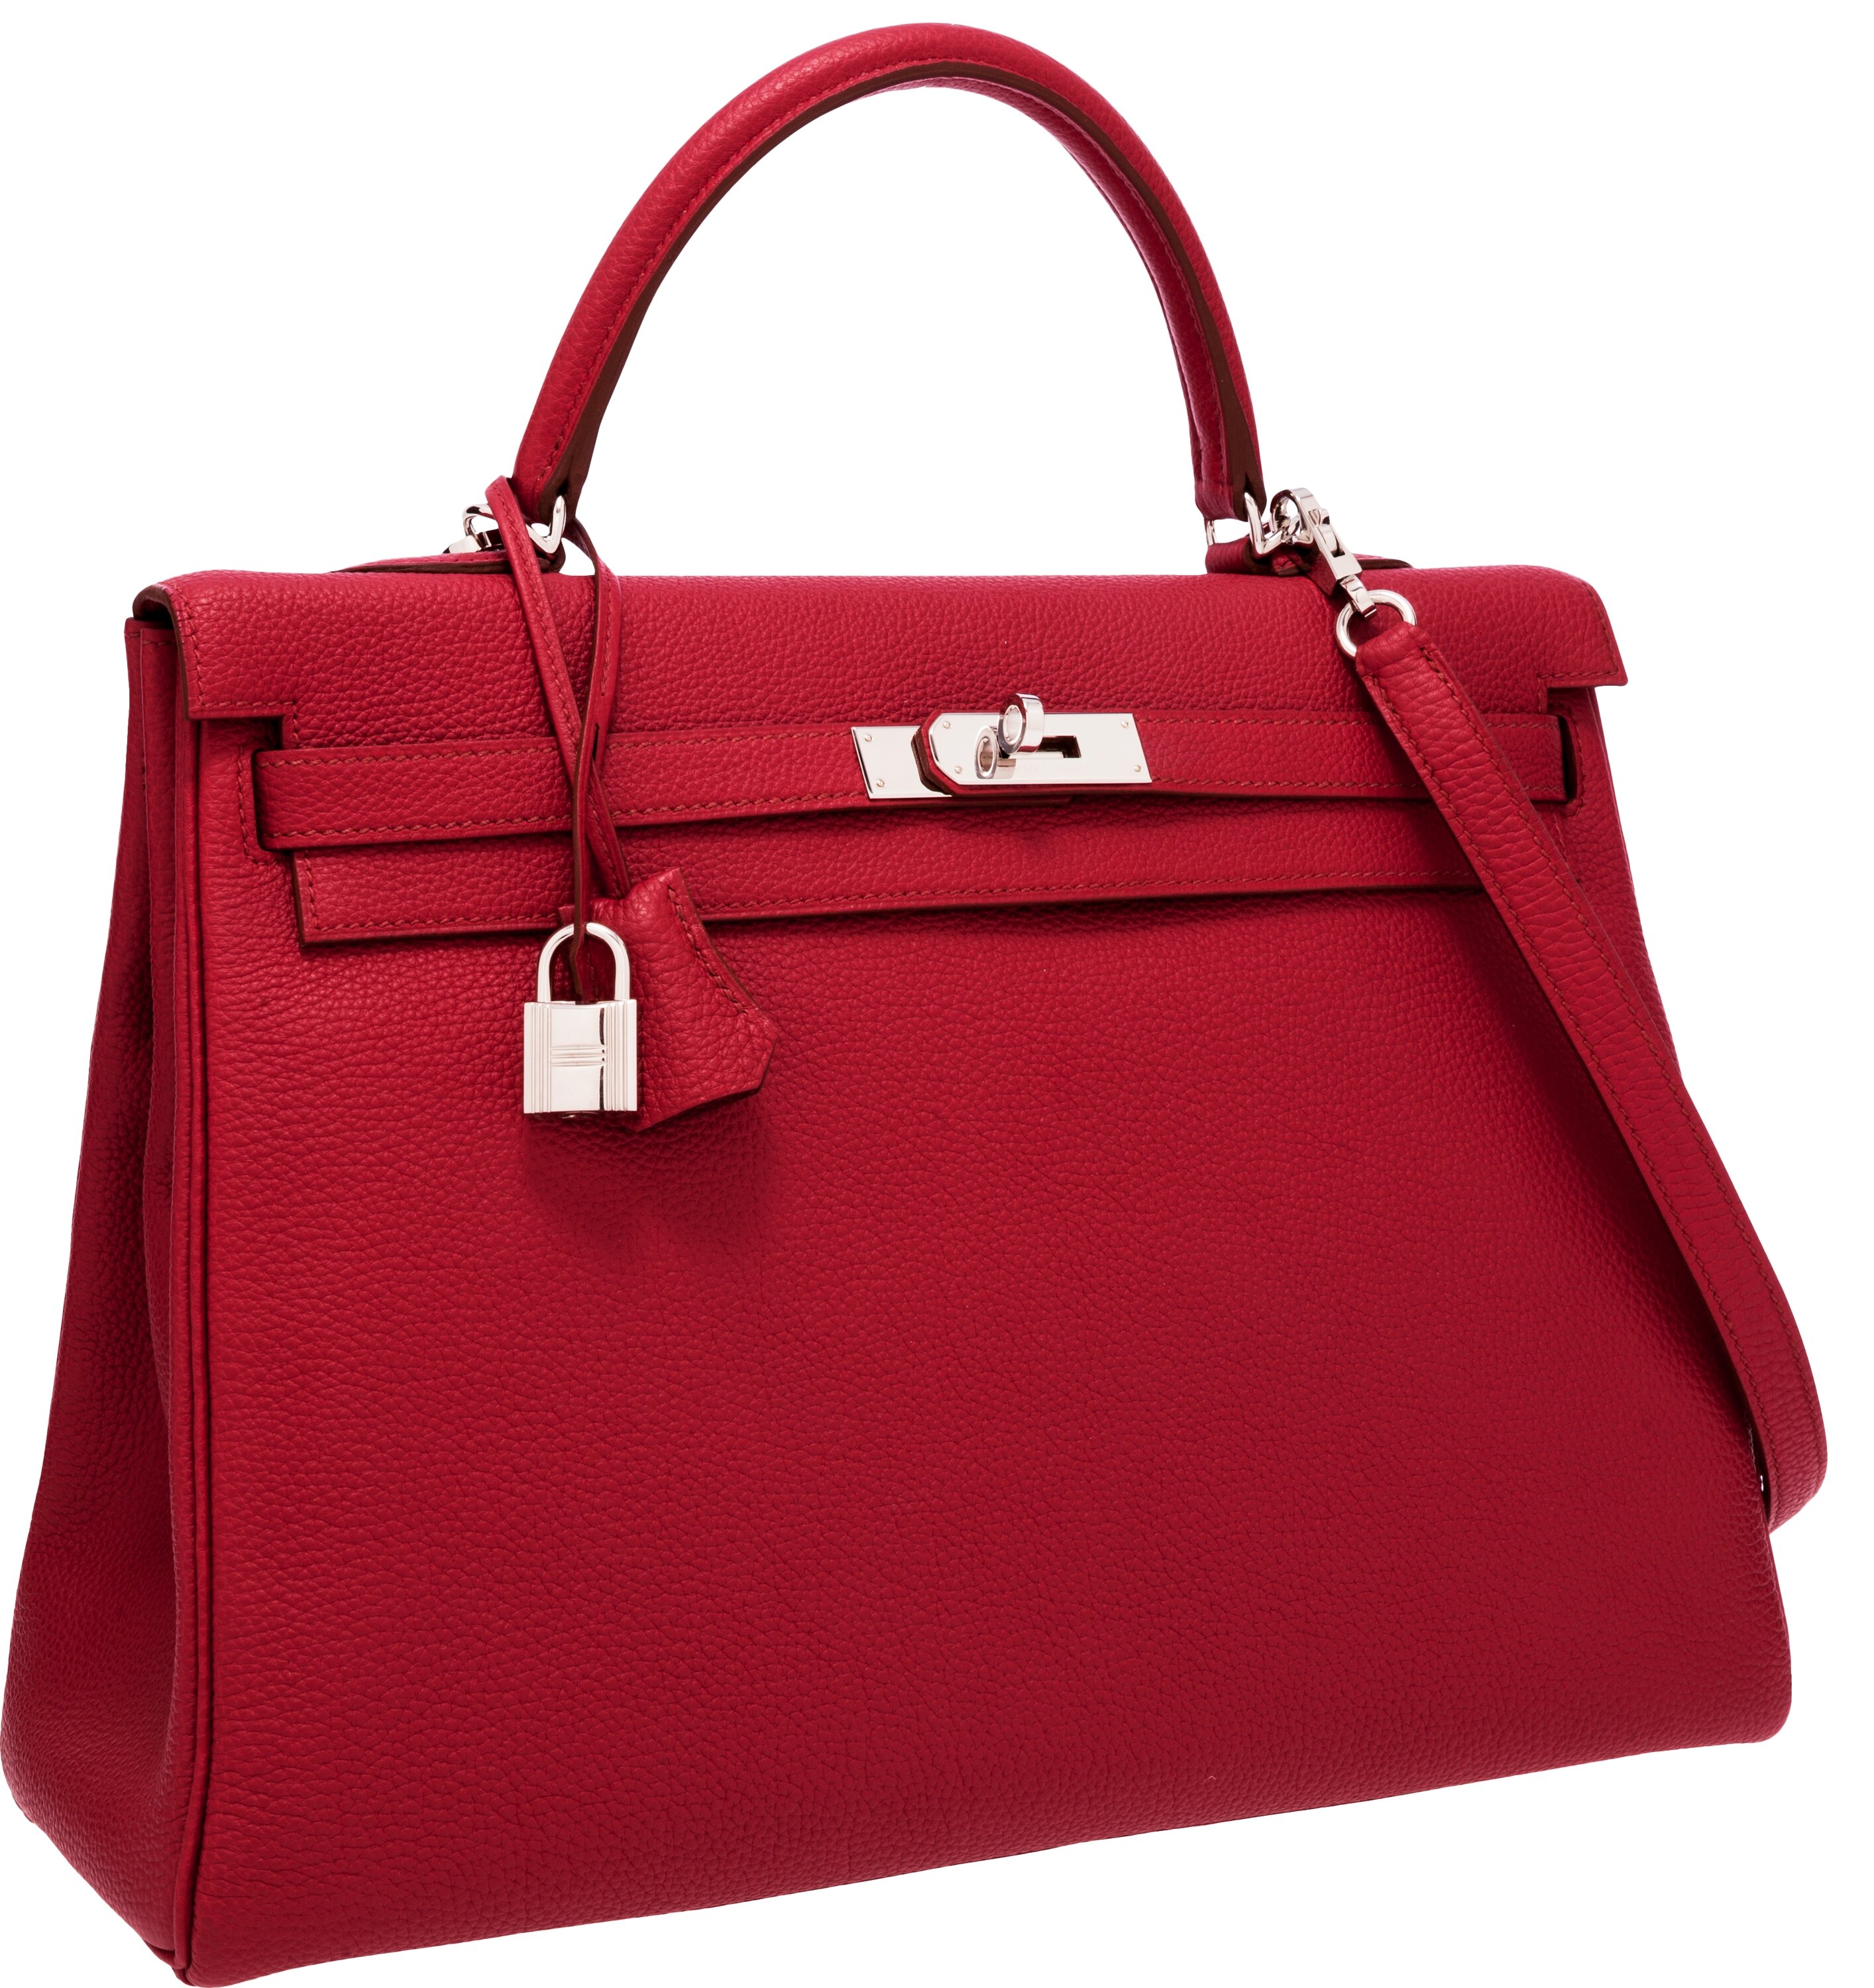 Hermes 35cm Rubis Clemence Leather Retourne Kelly Bag with | Lot #56033 ...